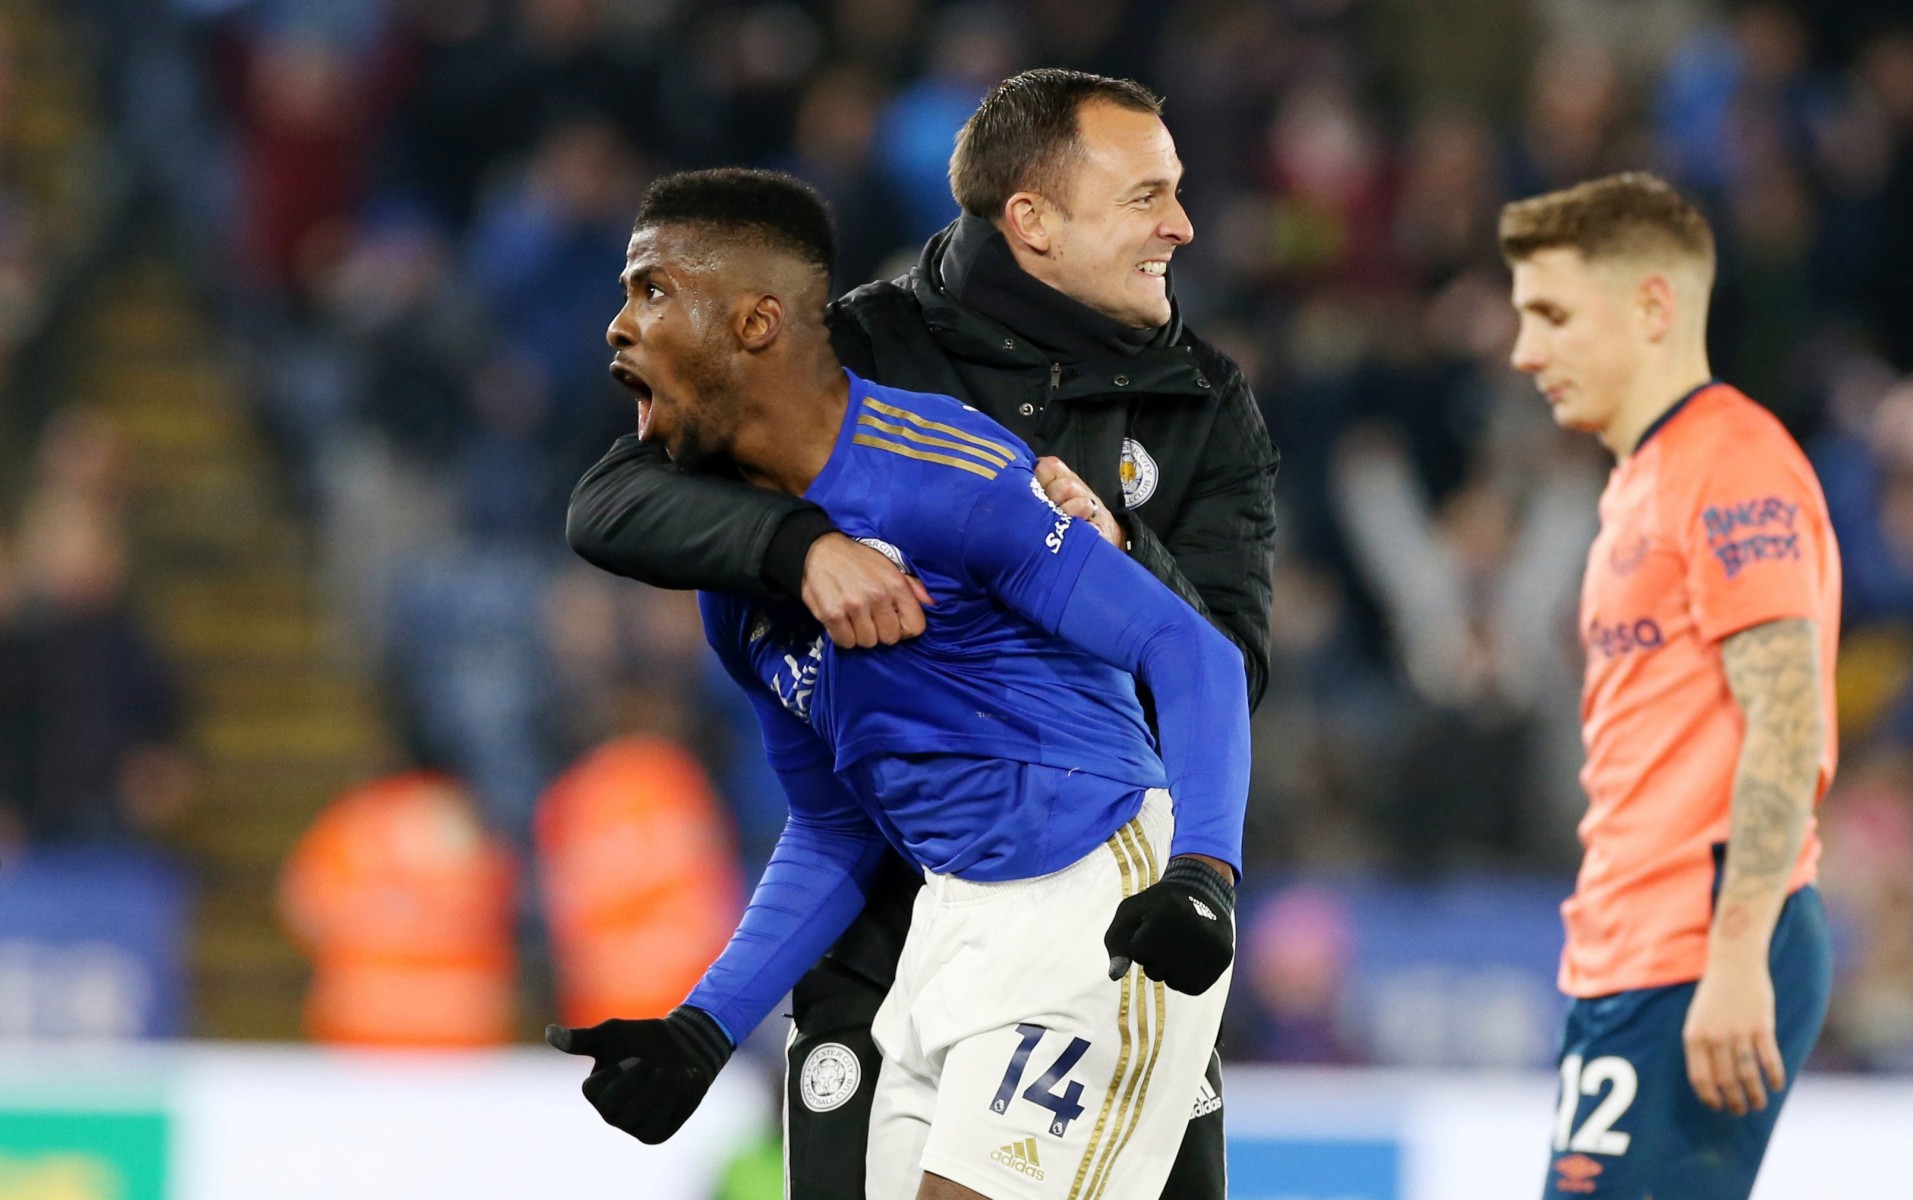 , Inside chaotic Leicester dressing room celebrations as players swarm on hero Iheanacho after dramatic Everton winner